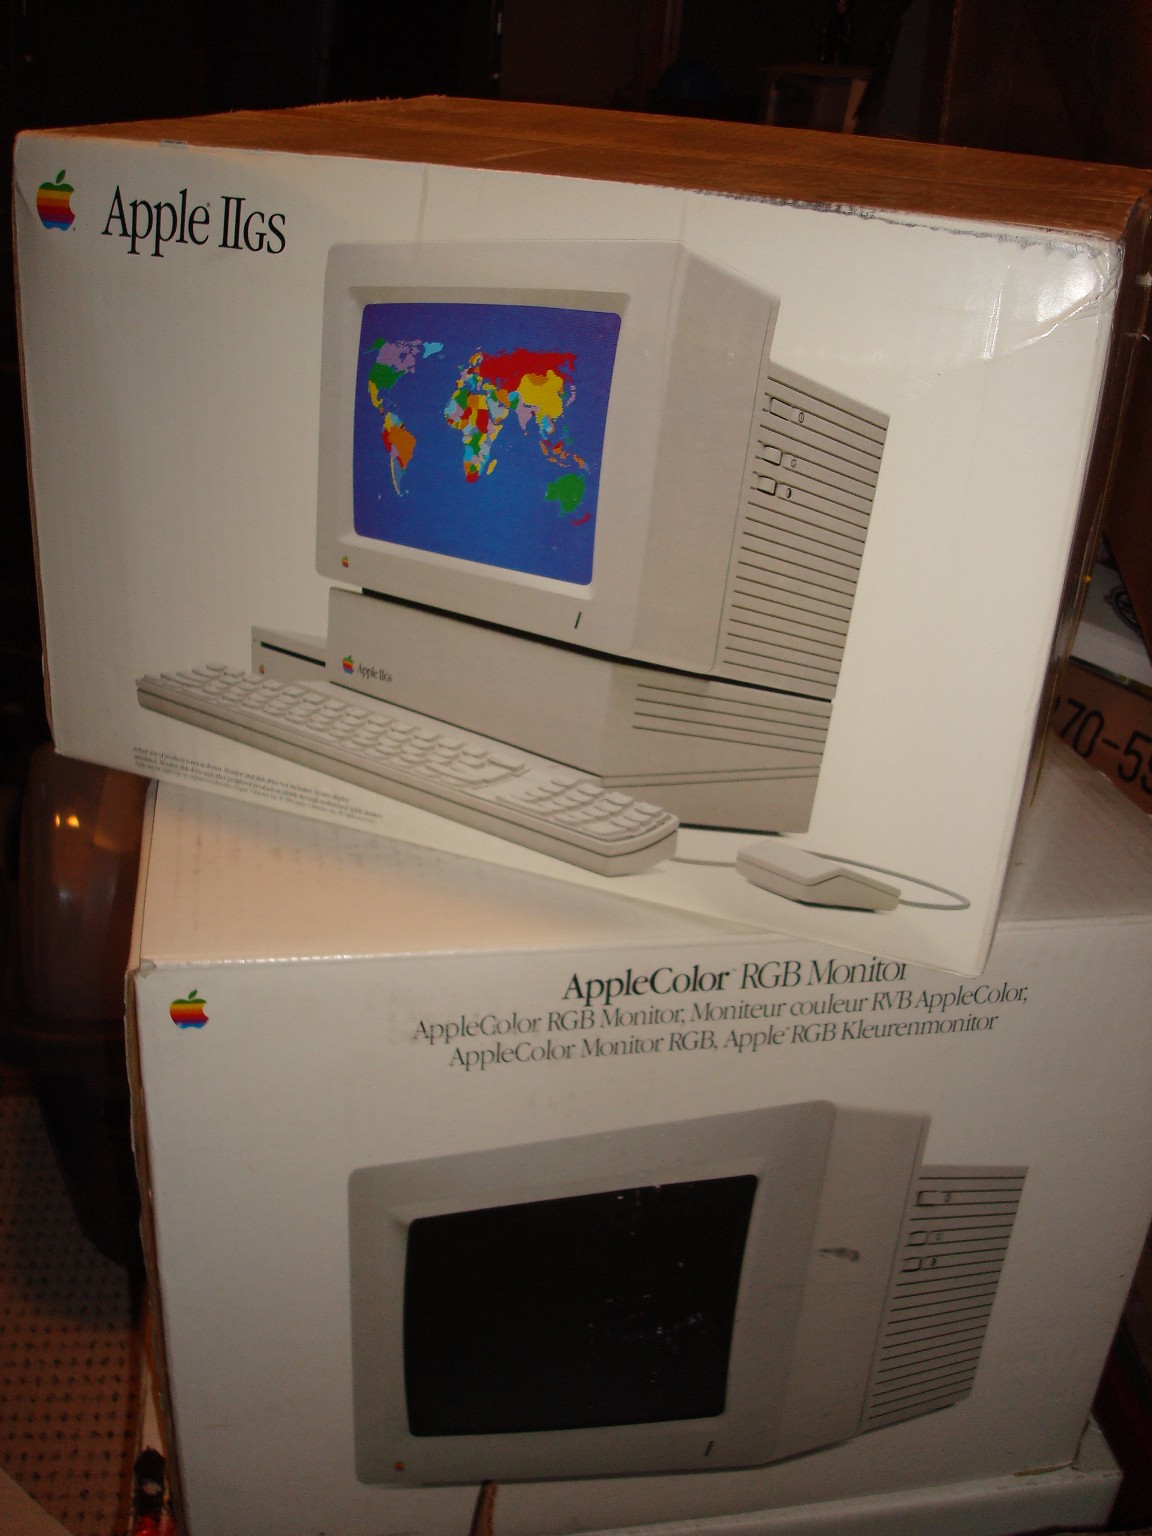 WOW!!! FOR SALE: Apple IIgs System Bundle - BRAND NEW IN BOX!!!! | Applefritter